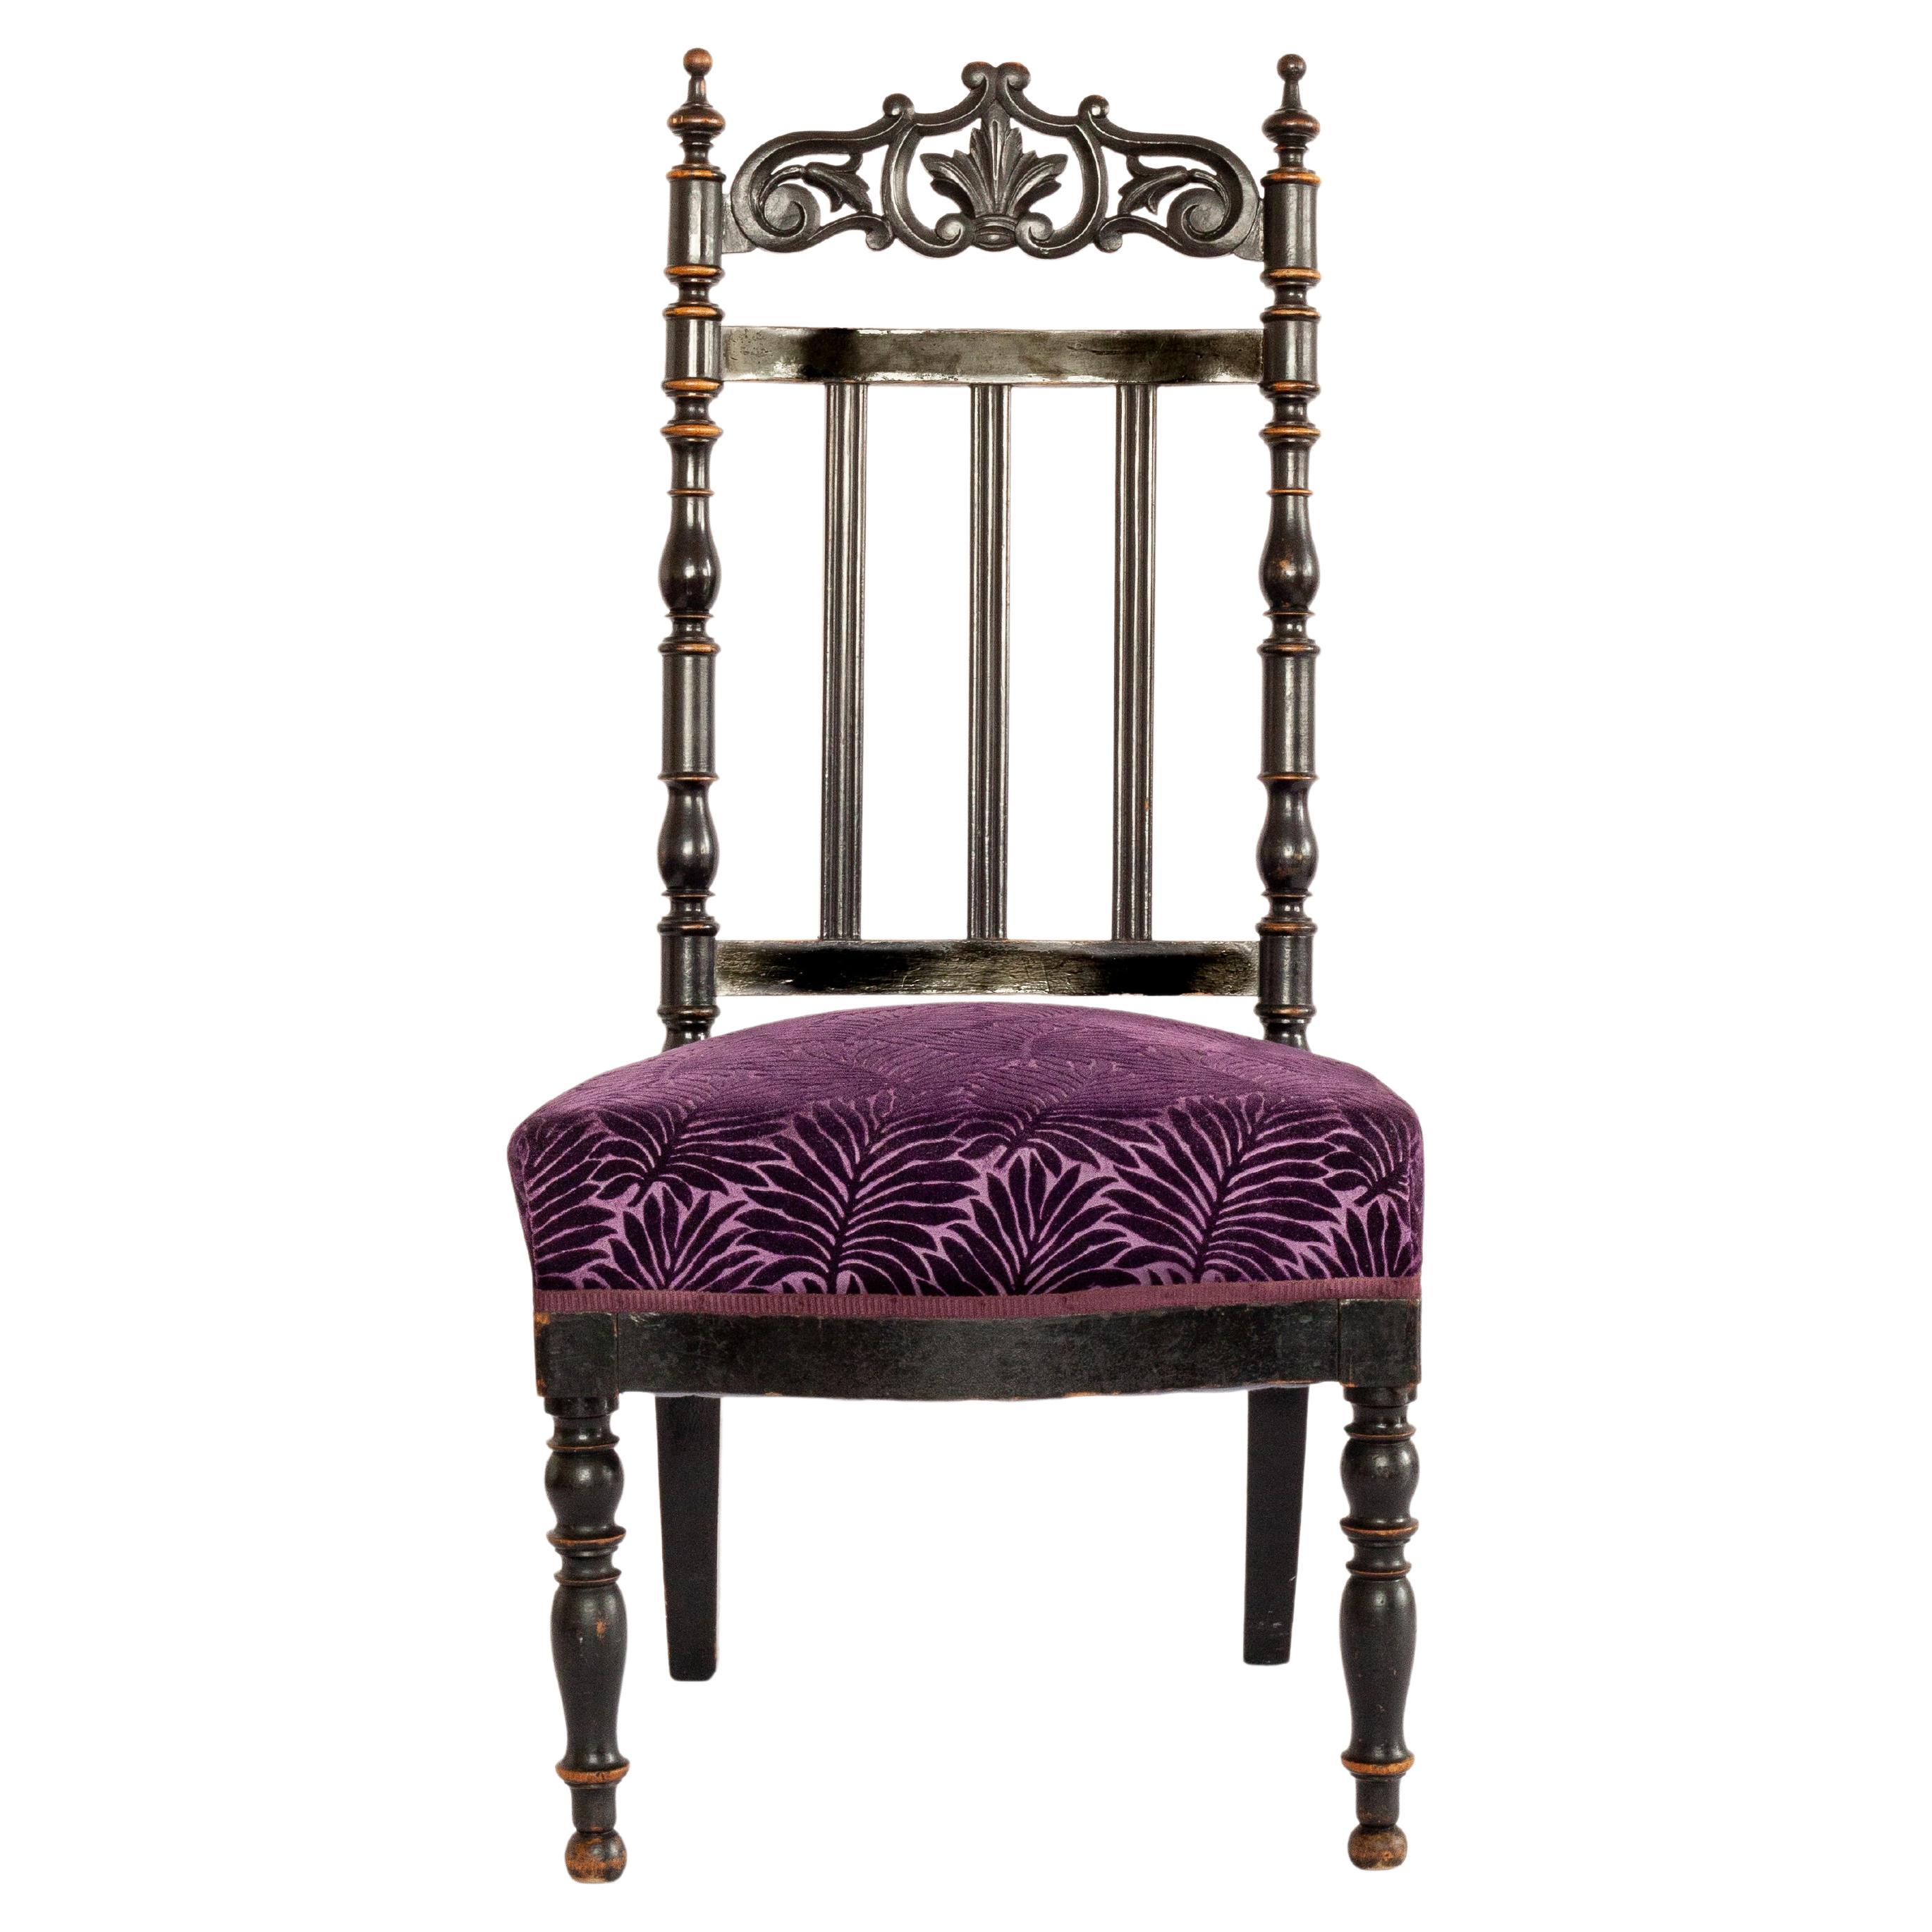 19th Century Antique French Napoleon III Era Purple and Black Chimney Chair For Sale